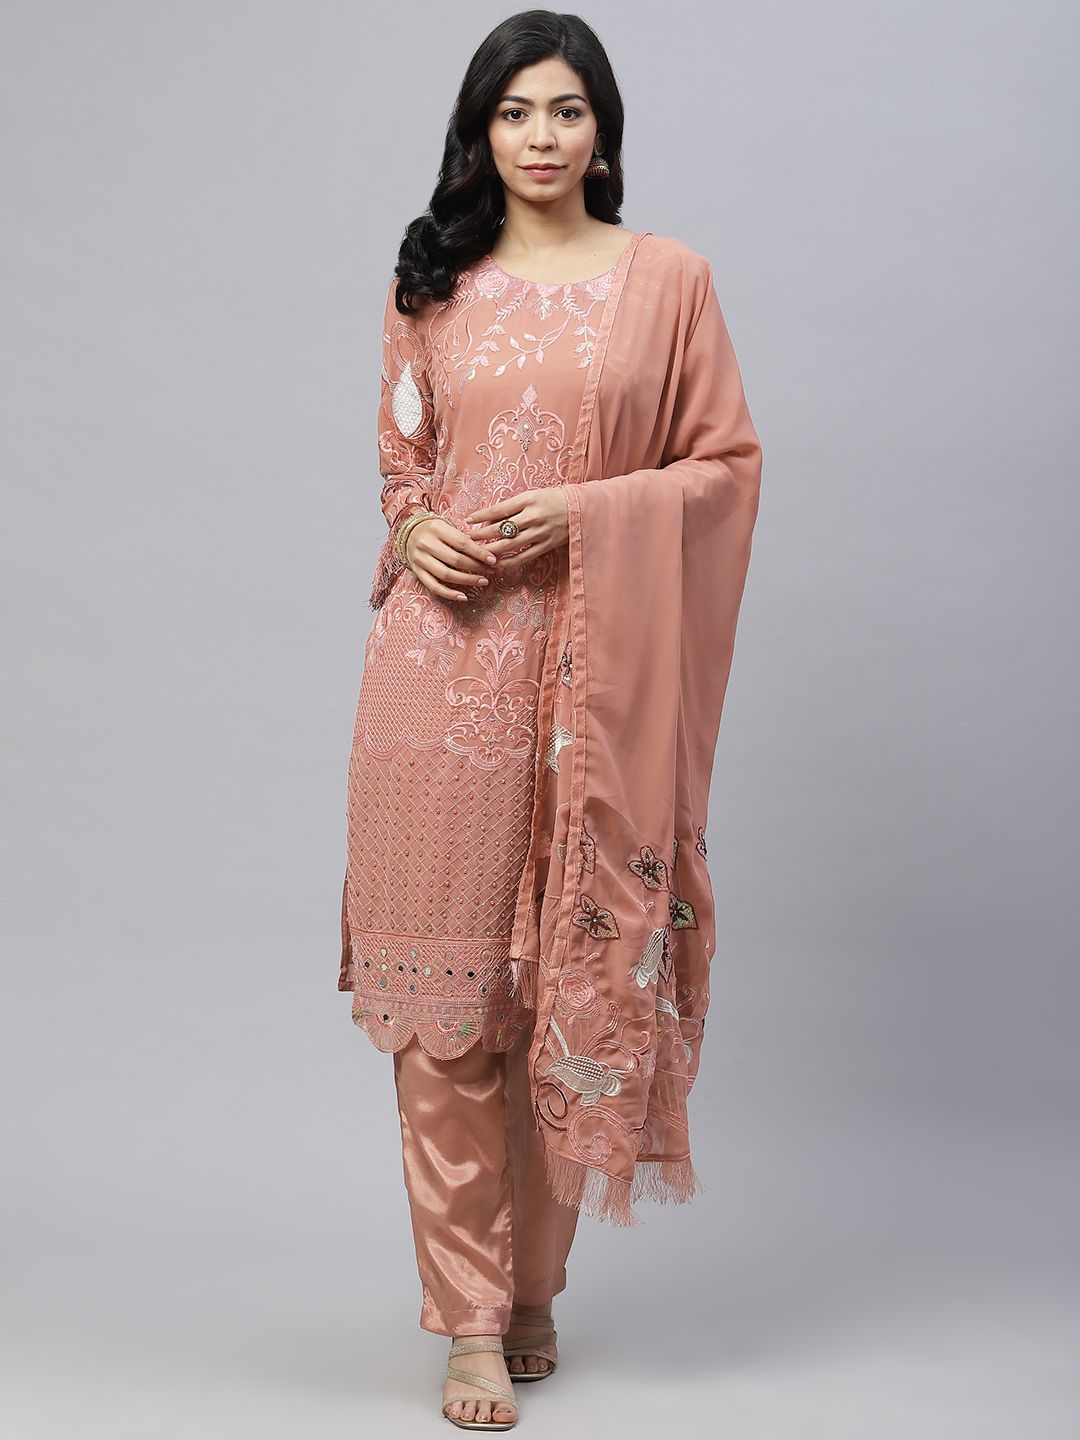 Readiprint Fashions Peach-Coloured & Silver Embroidered Unstitched Kurta Set Material Price in India